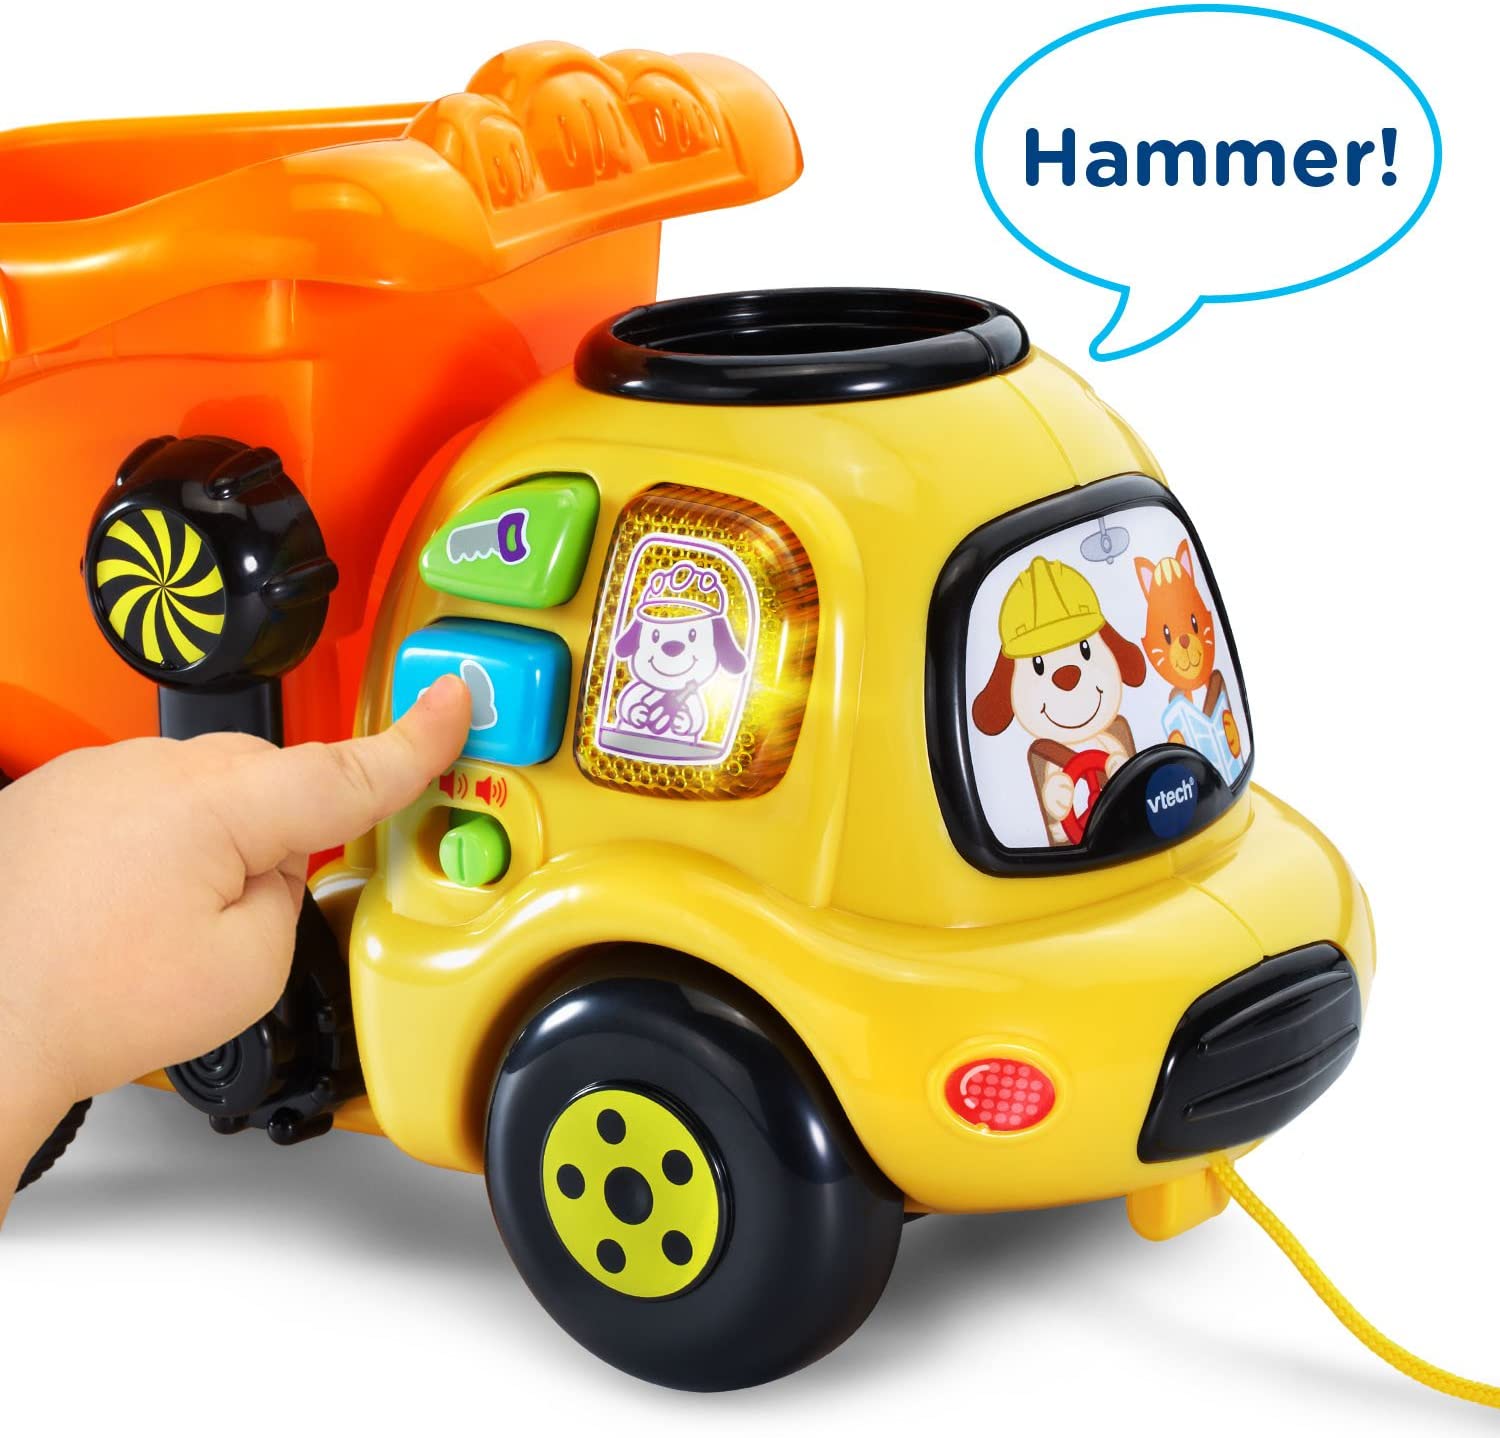 VTech Drop and Go Dump Truck, Orange - for Toddlers Ages 6 Months to 3 Years Old